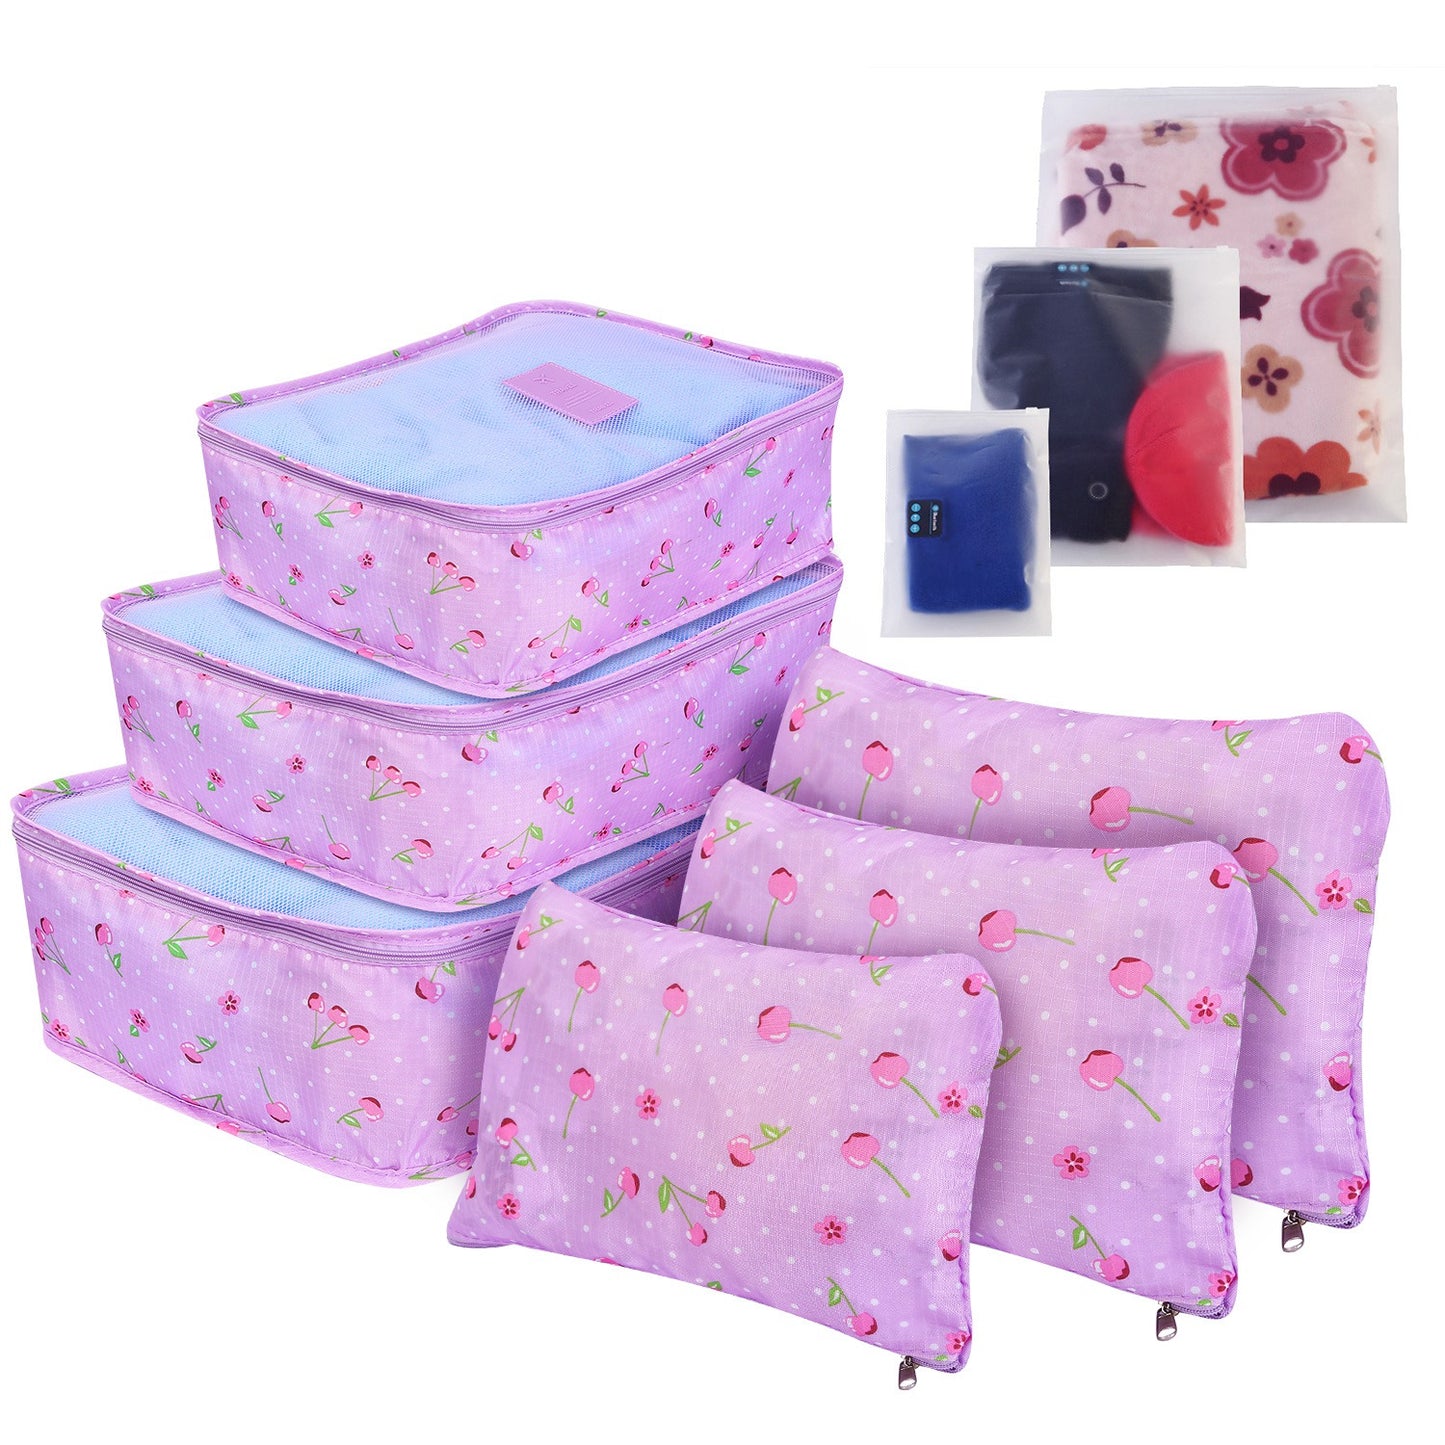 9Pcs Clothes Storage Bags Water-Resistant Travel Luggage Organizer Clothing Packing Cubes for Blouse Hosiery Stocking Underwear - Purple -